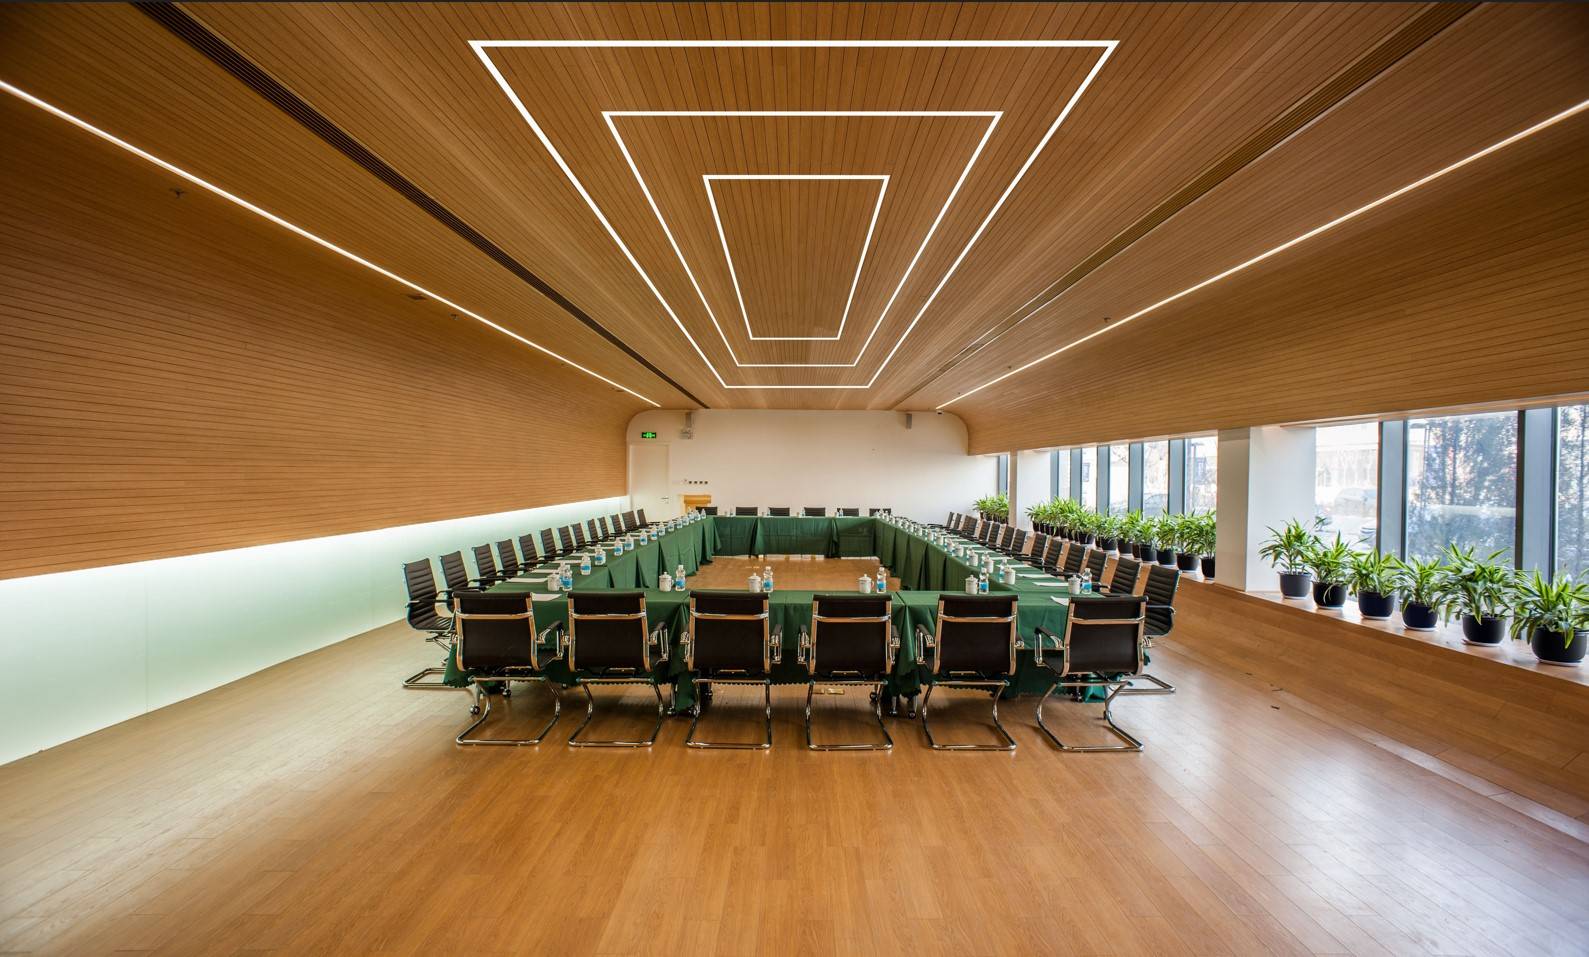 Recessed LED linear lights installed on ceiling of a large conference room.